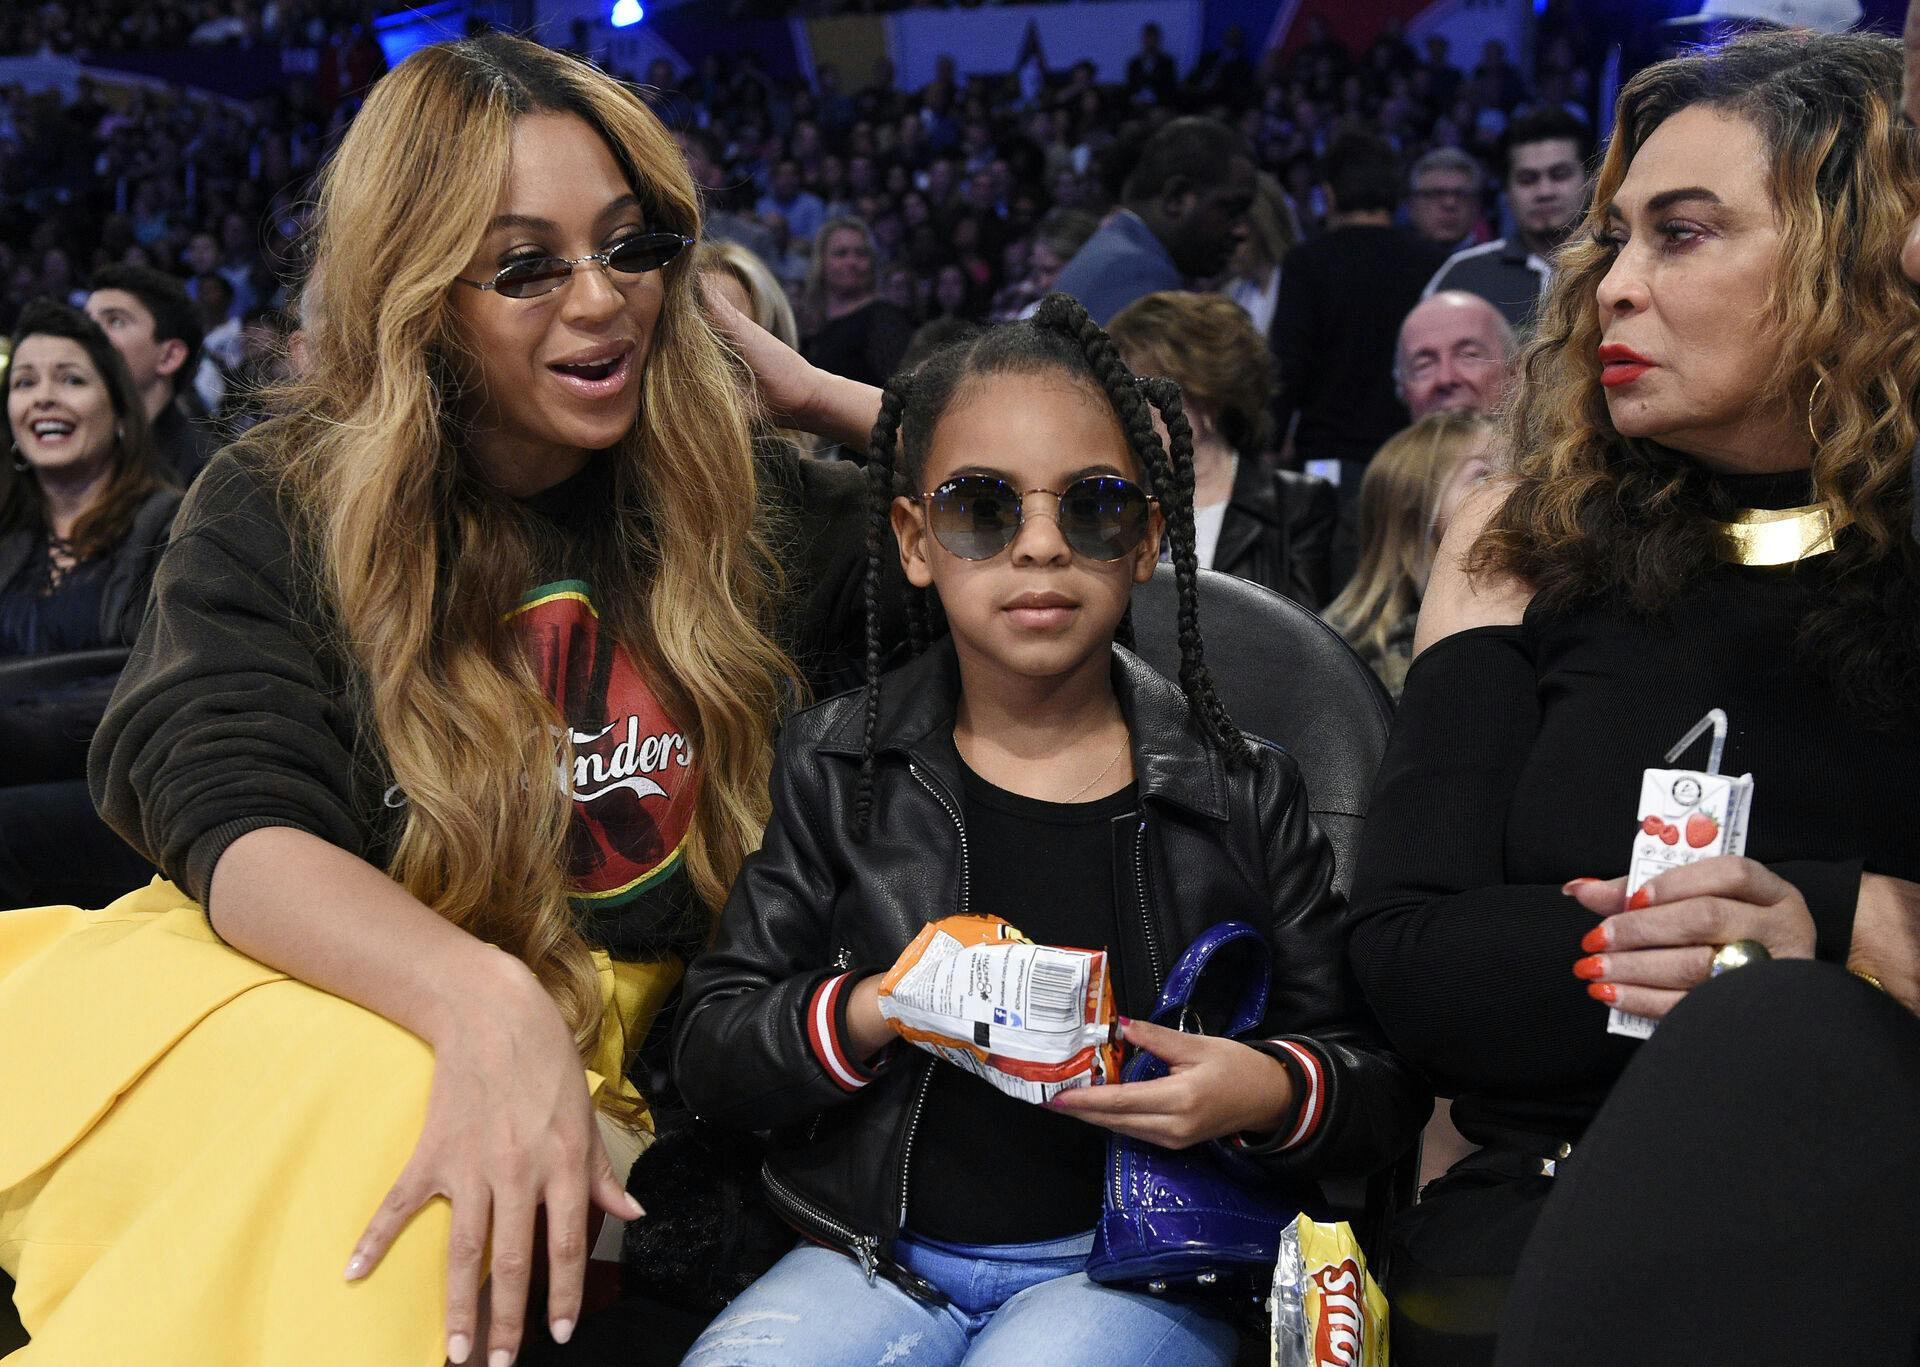 Singer Beyonce, left, sits with her daughter Blue Ivy Carter, center, and her mother Tina Knowles during the second half of an NBA All-Star basketball game, Sunday, Feb. 18, 2018, in Los Angeles. (AP Photo/Chris Pizzello)